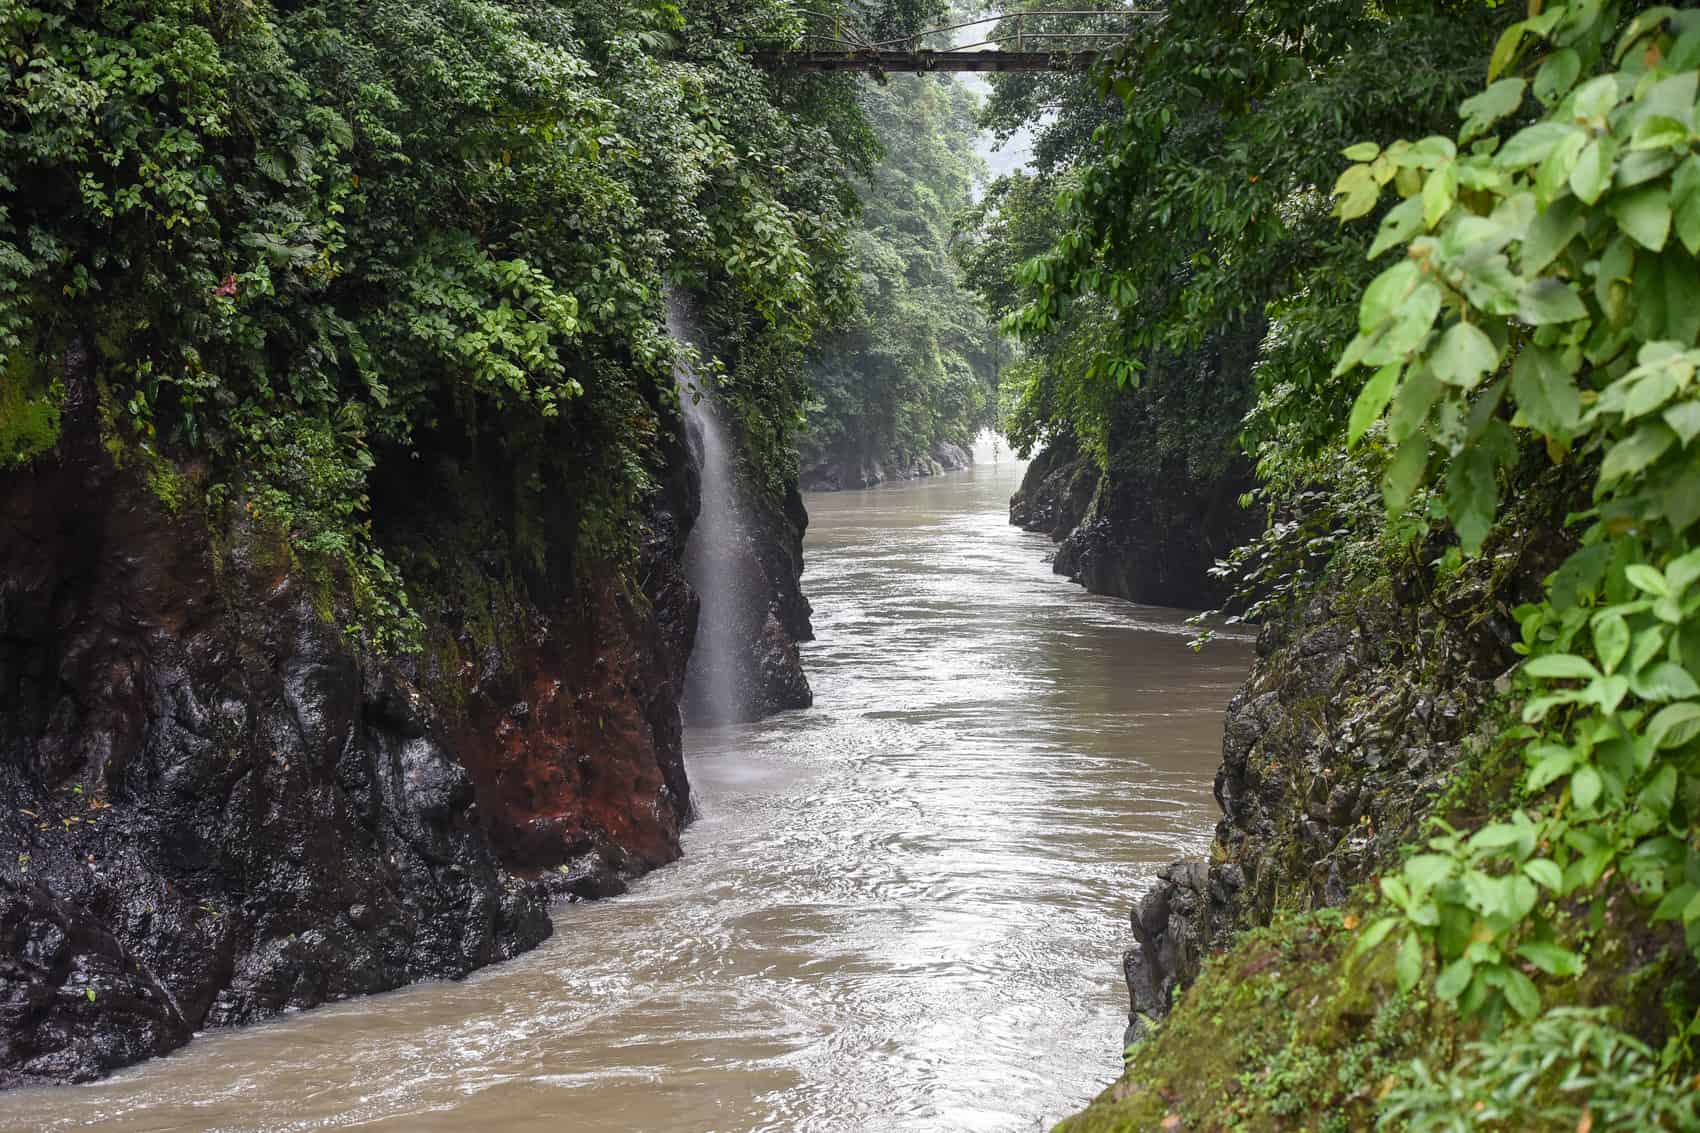 The most visually stunning stretch of the Pacuare, the gorge at Dos Montañas, was considered a perfect spot for a dam because it was so narrow — until an earthquake ruled that out.